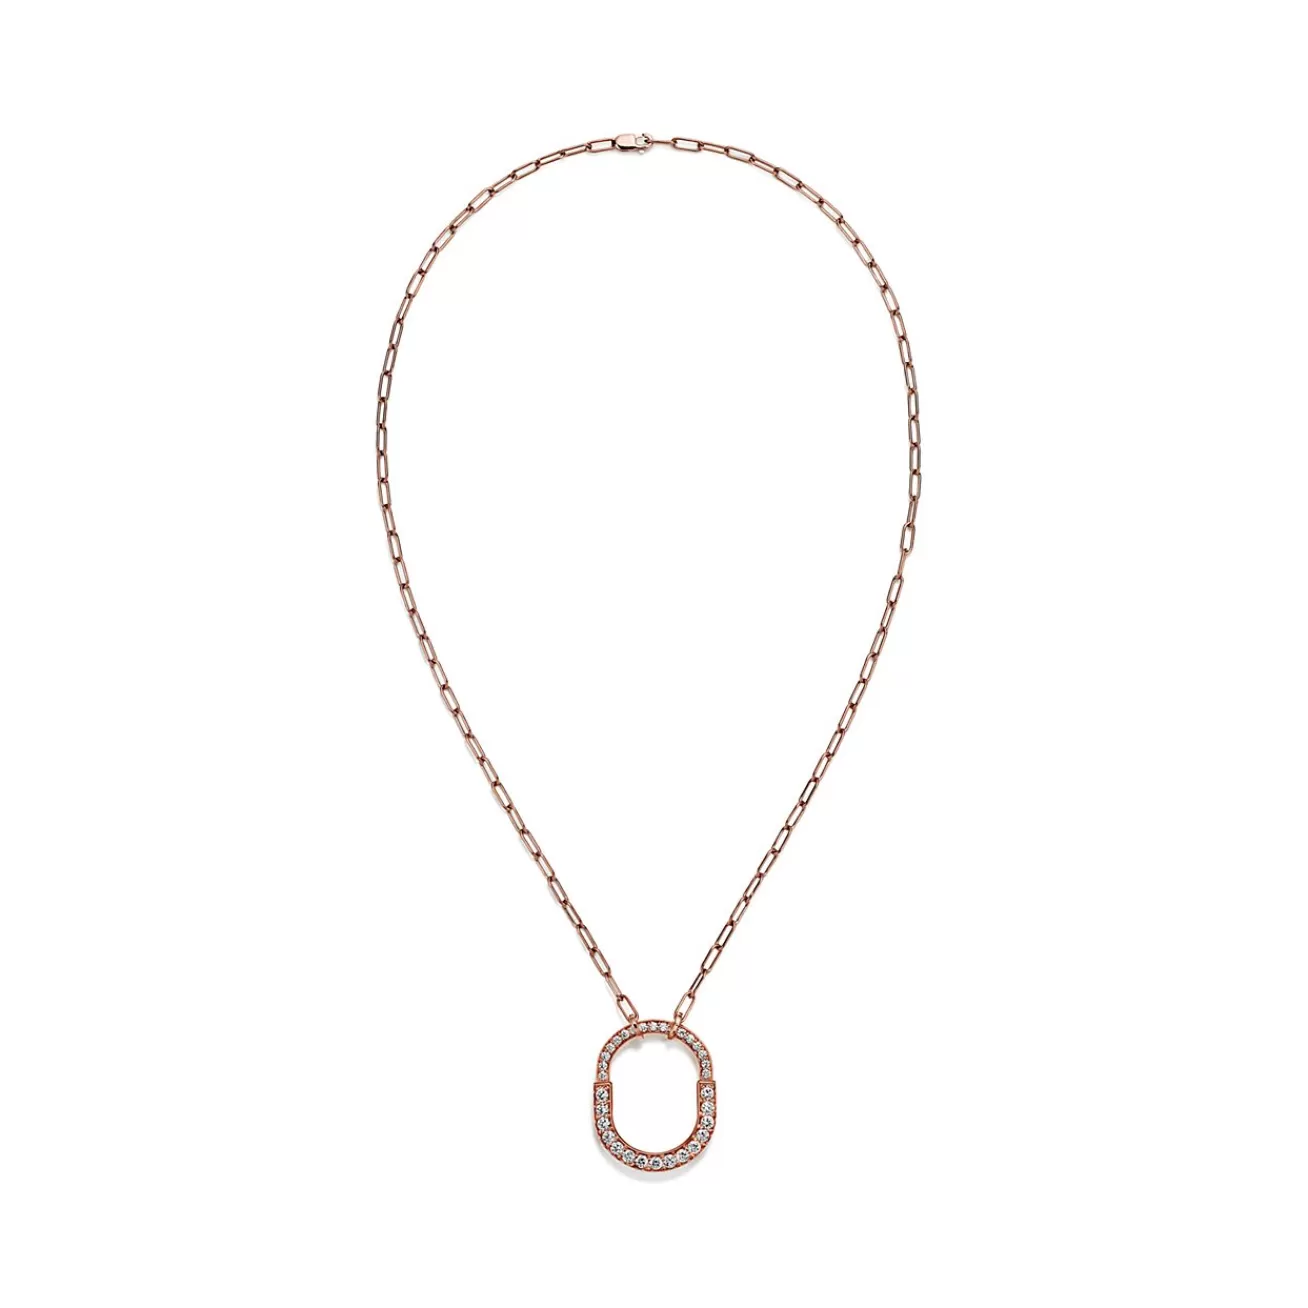 Tiffany & Co. Tiffany Lock Pendant in Rose Gold with Pavé Diamonds, Medium | ^ Necklaces & Pendants | Rose Gold Jewelry